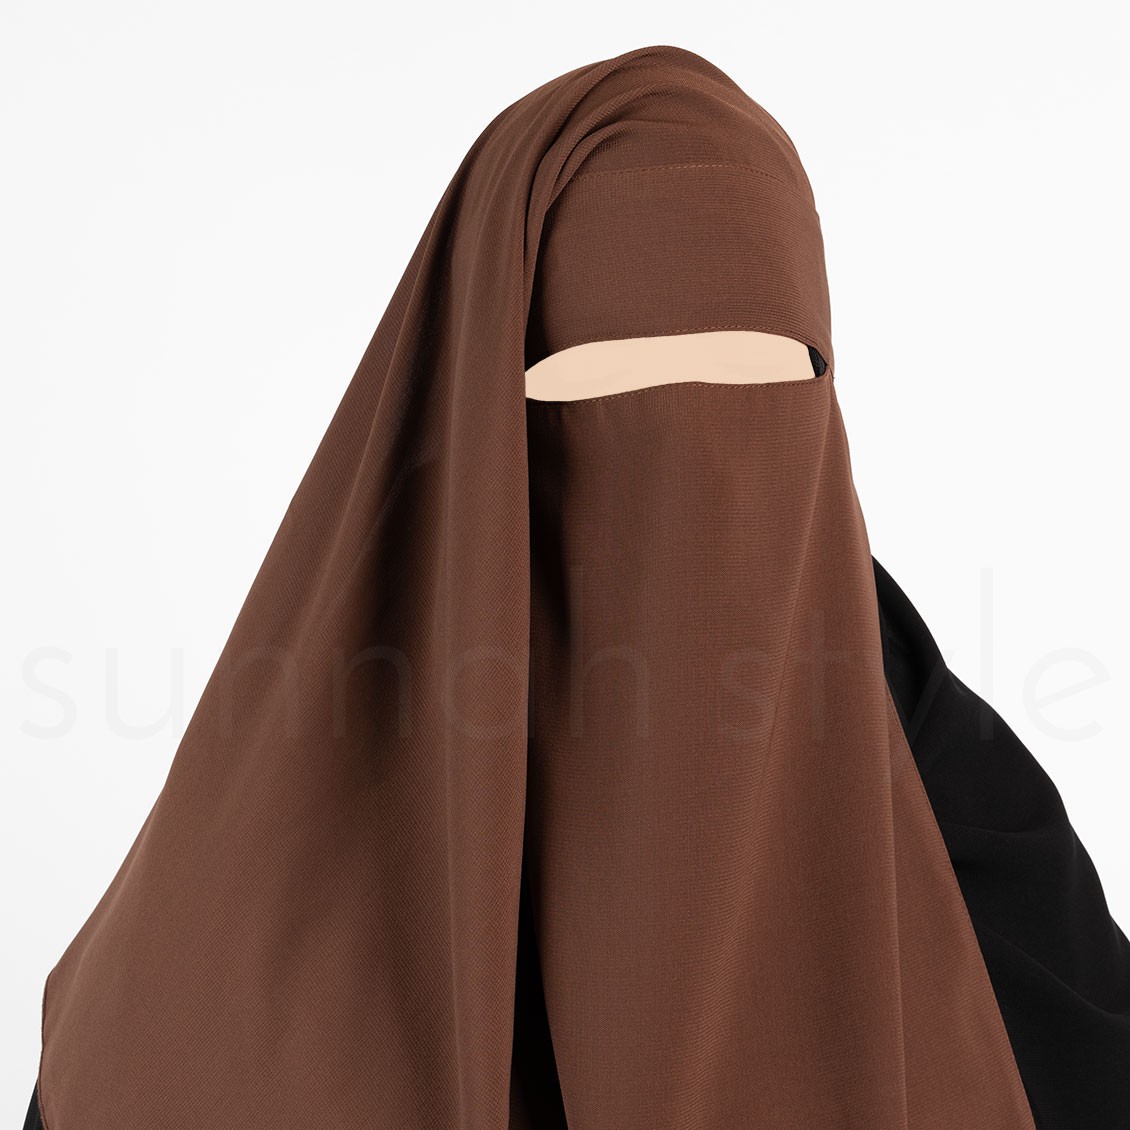 Sunnah Style Two Layer Niqab Pecan